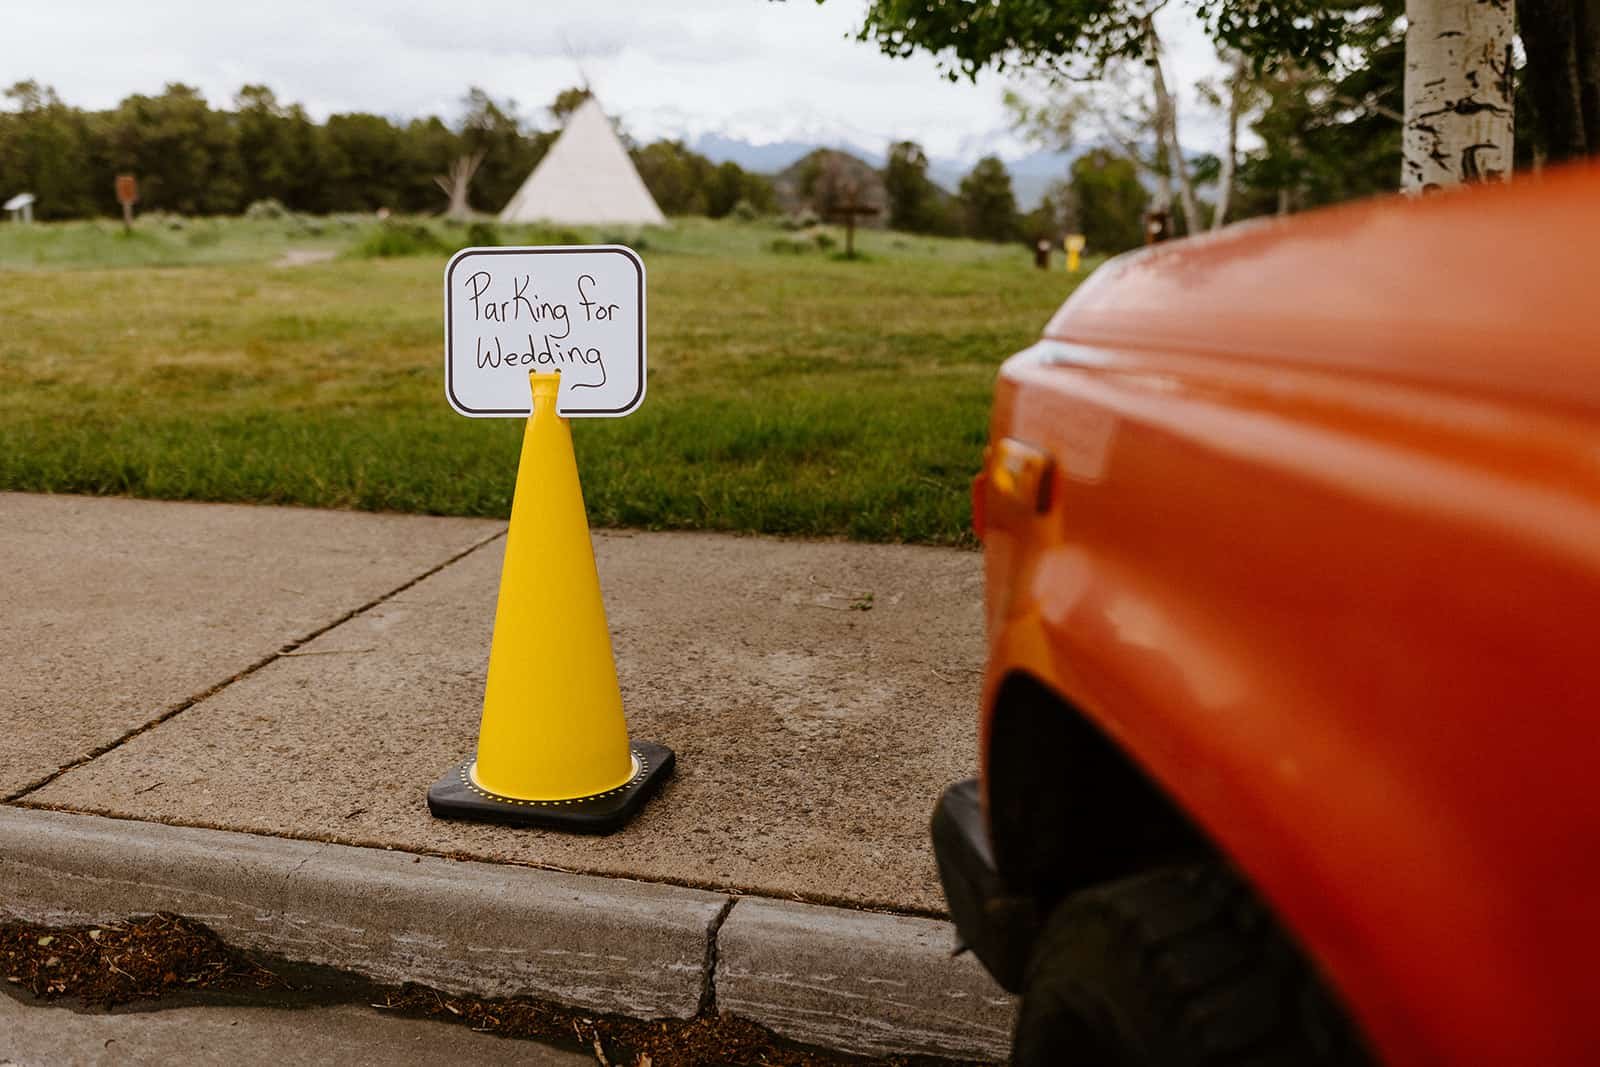 A yellow cone holds a sign "Parking for Wedding" at Ridgway State Park